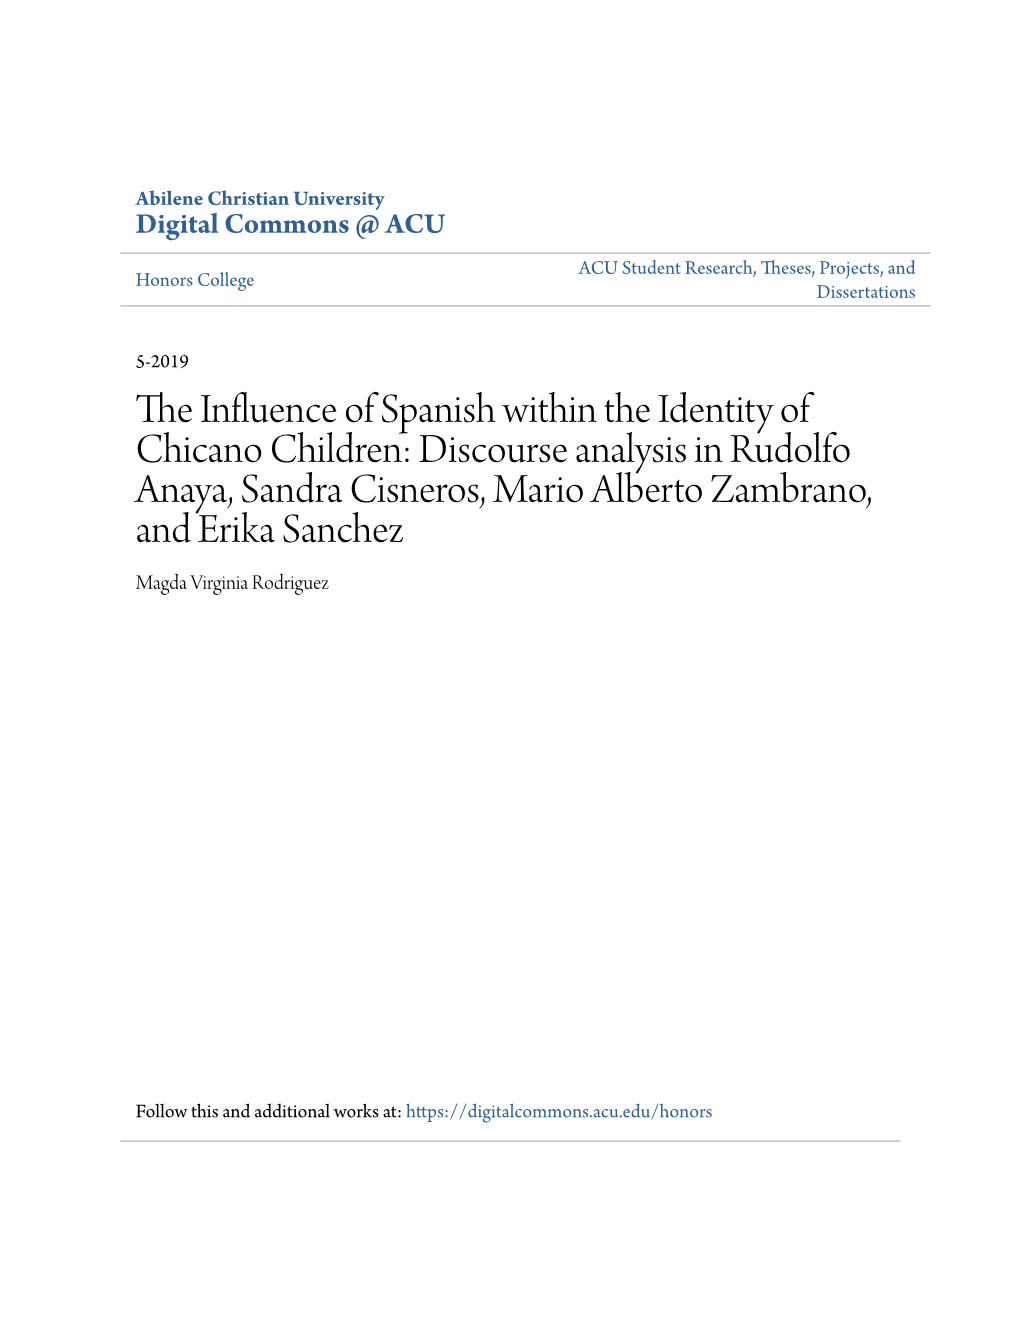 The Influence of Spanish Within the Identity of Chicano Children: Discourse Analysis In